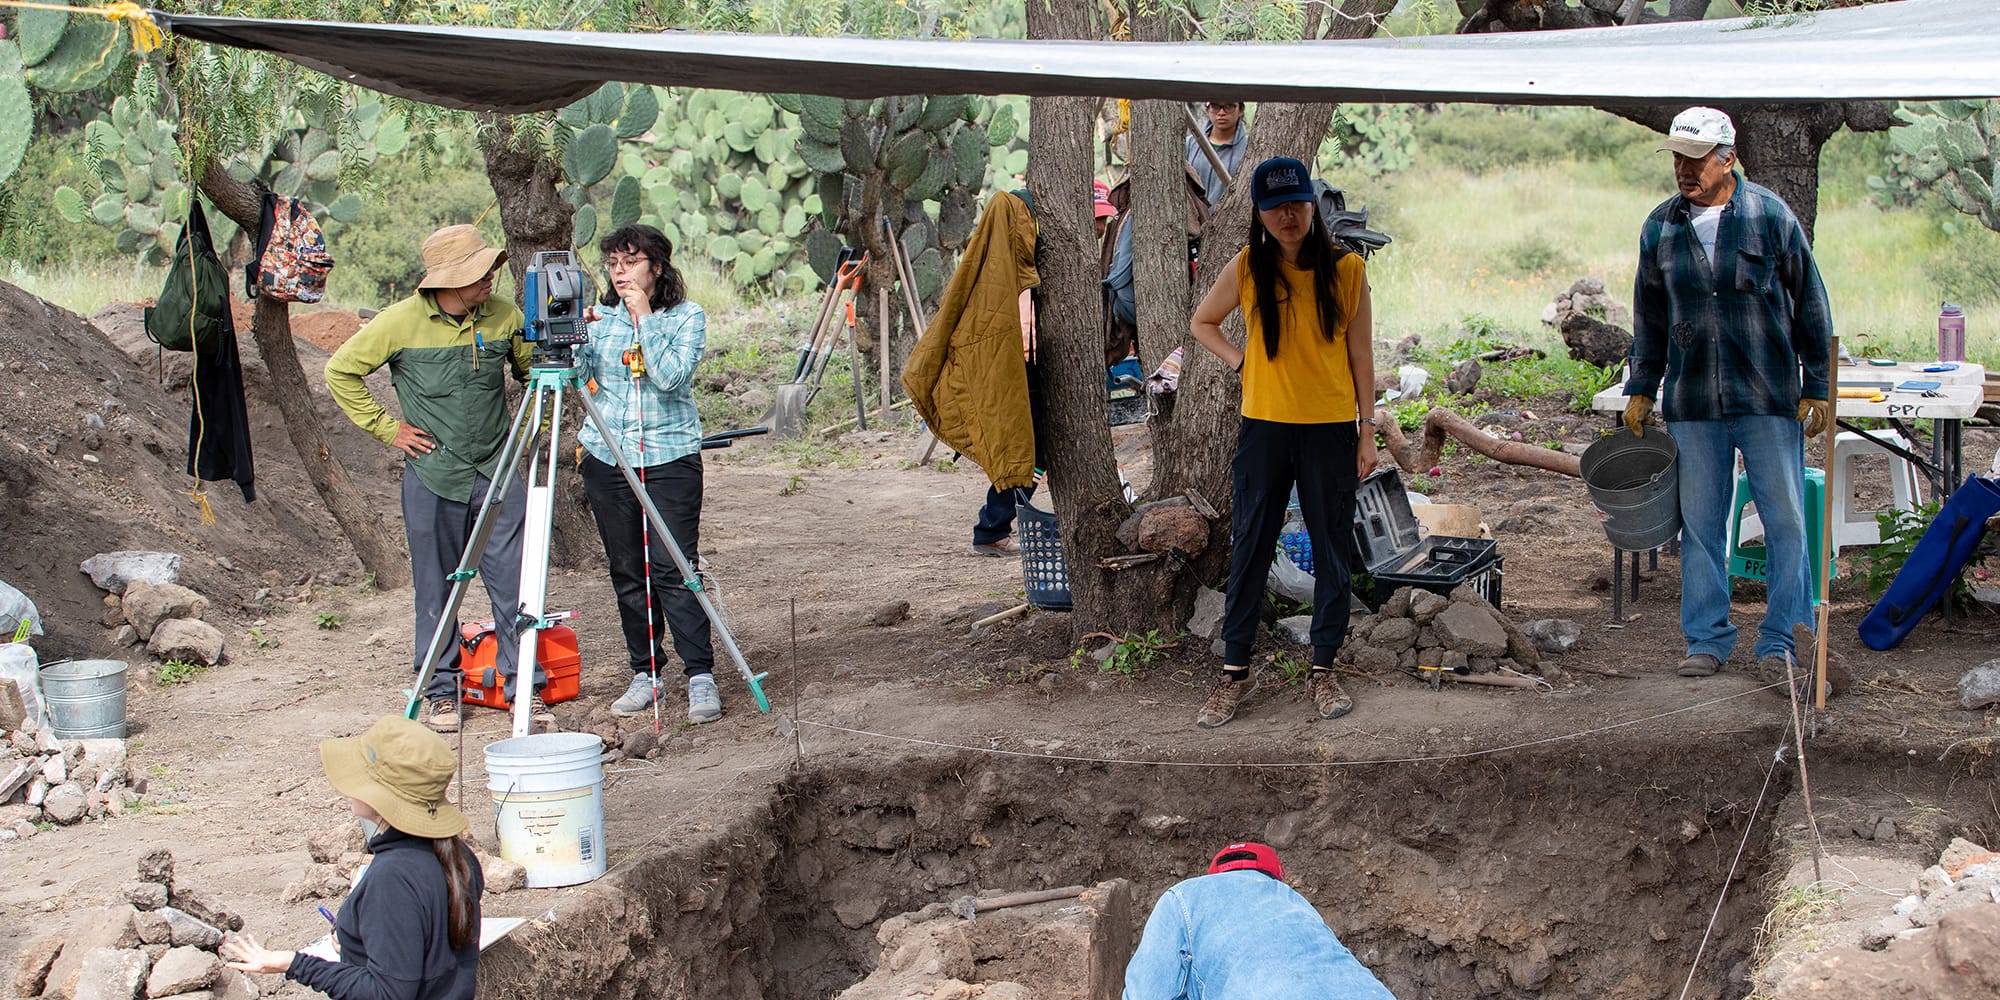 Archeologists including UCR’s Nawa Sugiyama work at an excavation site in Teotihuacan, Mexico. 